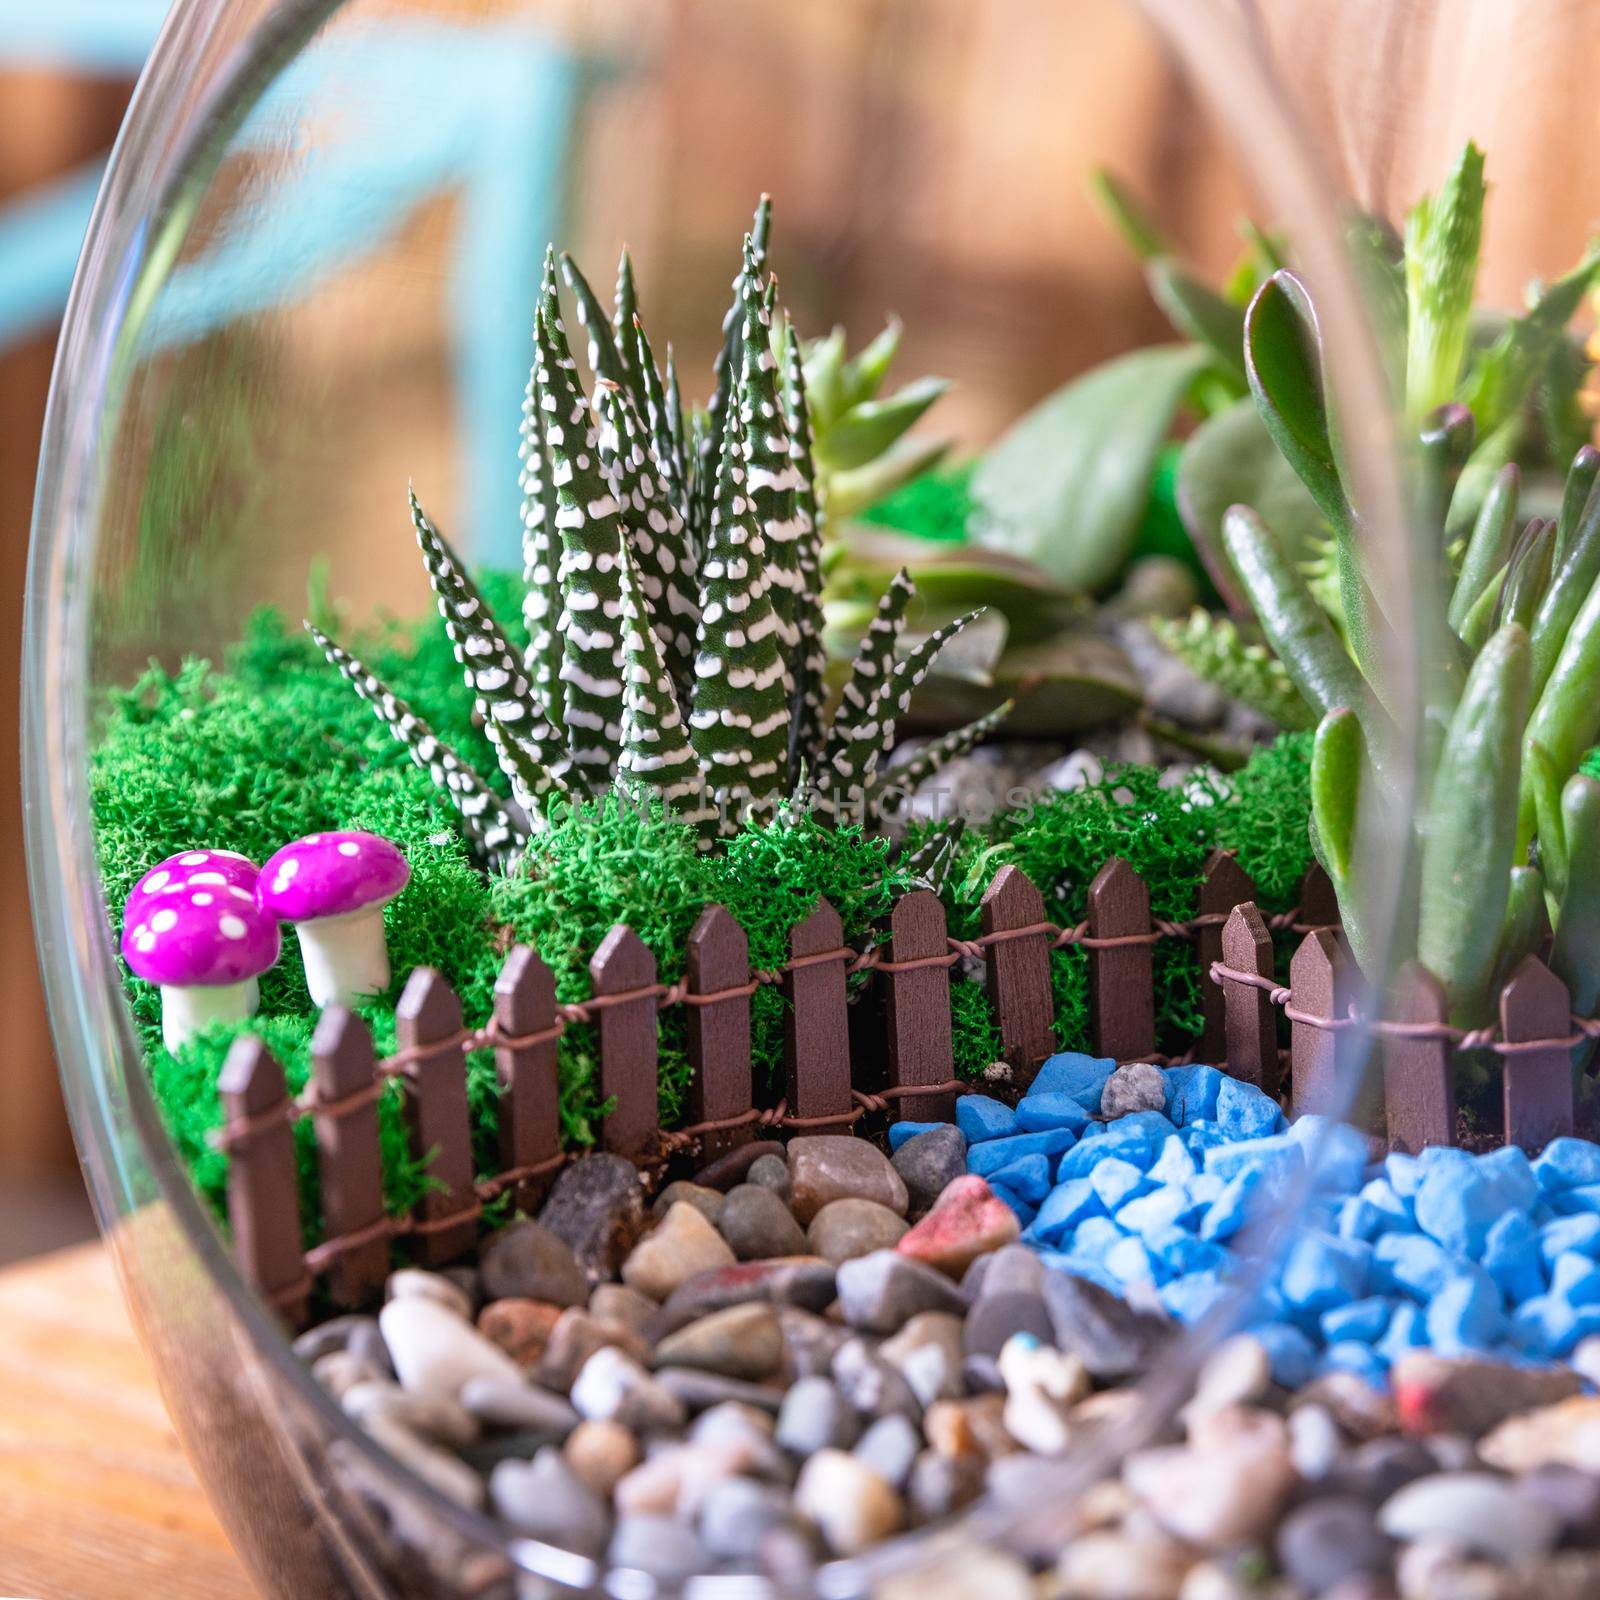 Terrarium, sand, rock, succulent, cactus, decor small house in the glass by ferhad